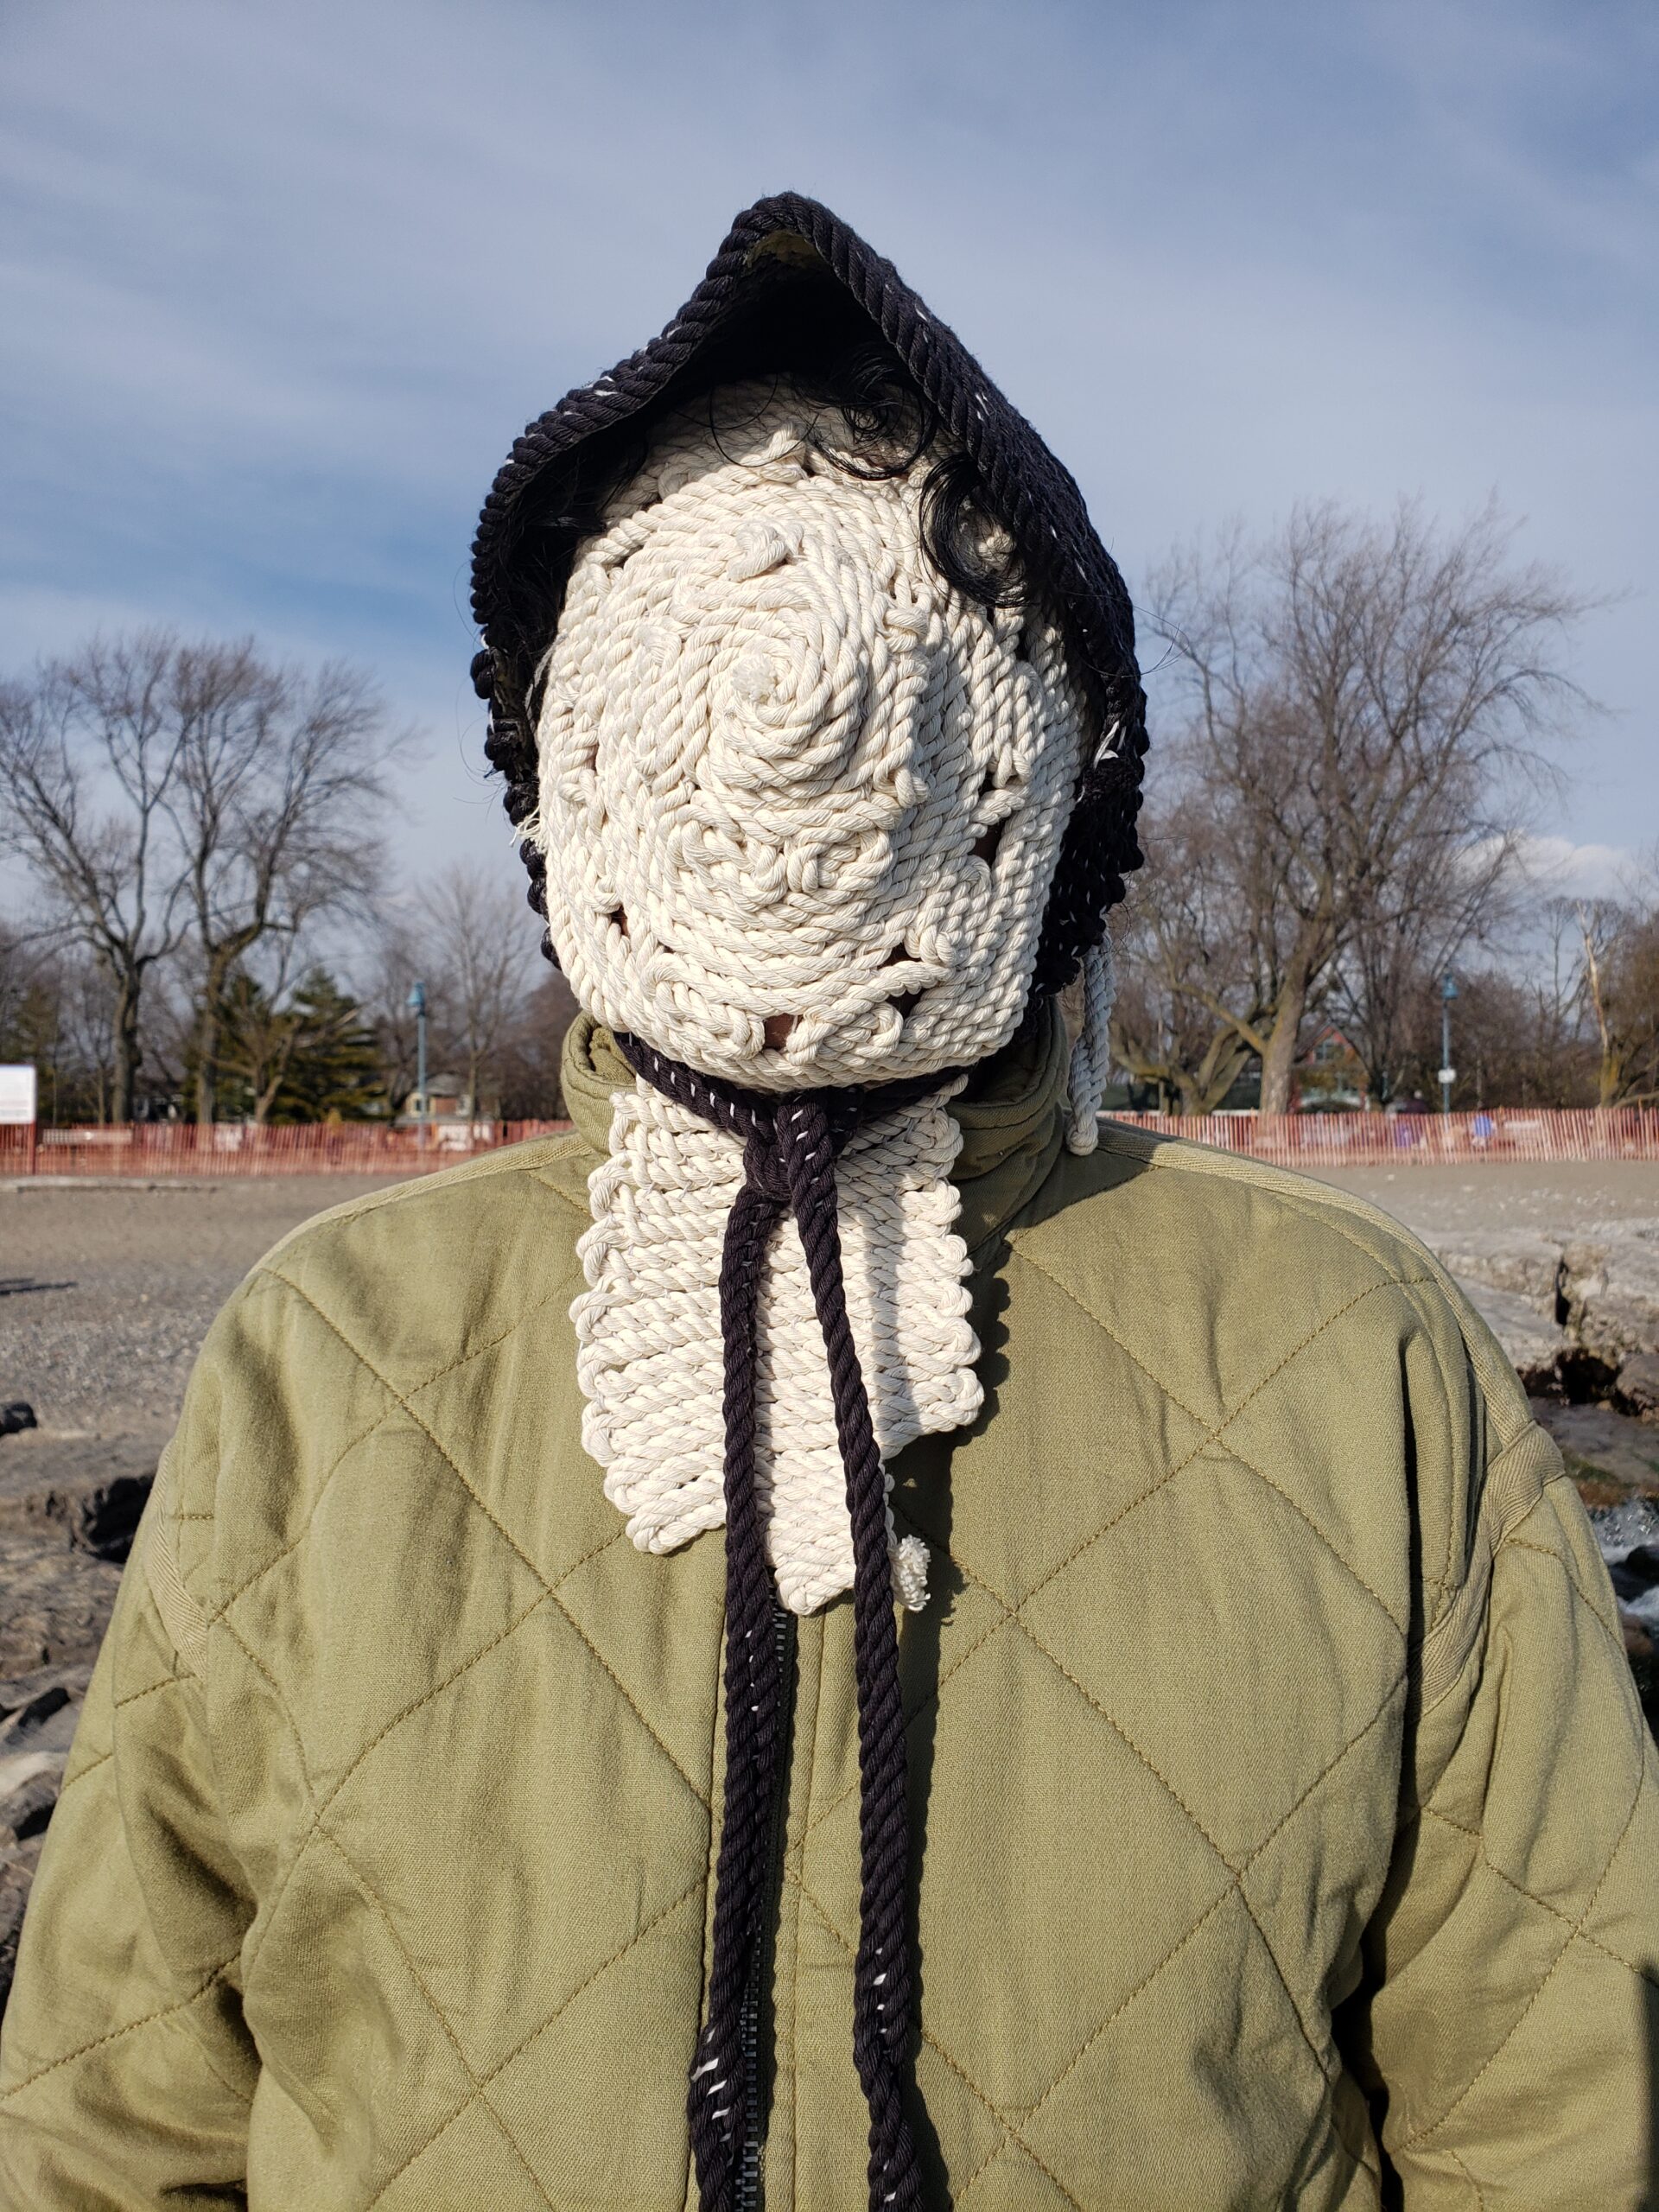 Akash is outdoors, wearing a green sweater and their face and neck is completely covered by a textile mask of thick white rope that is stitched together in a circular pattern. They are wearing a black bonnet made of similar thick rope.